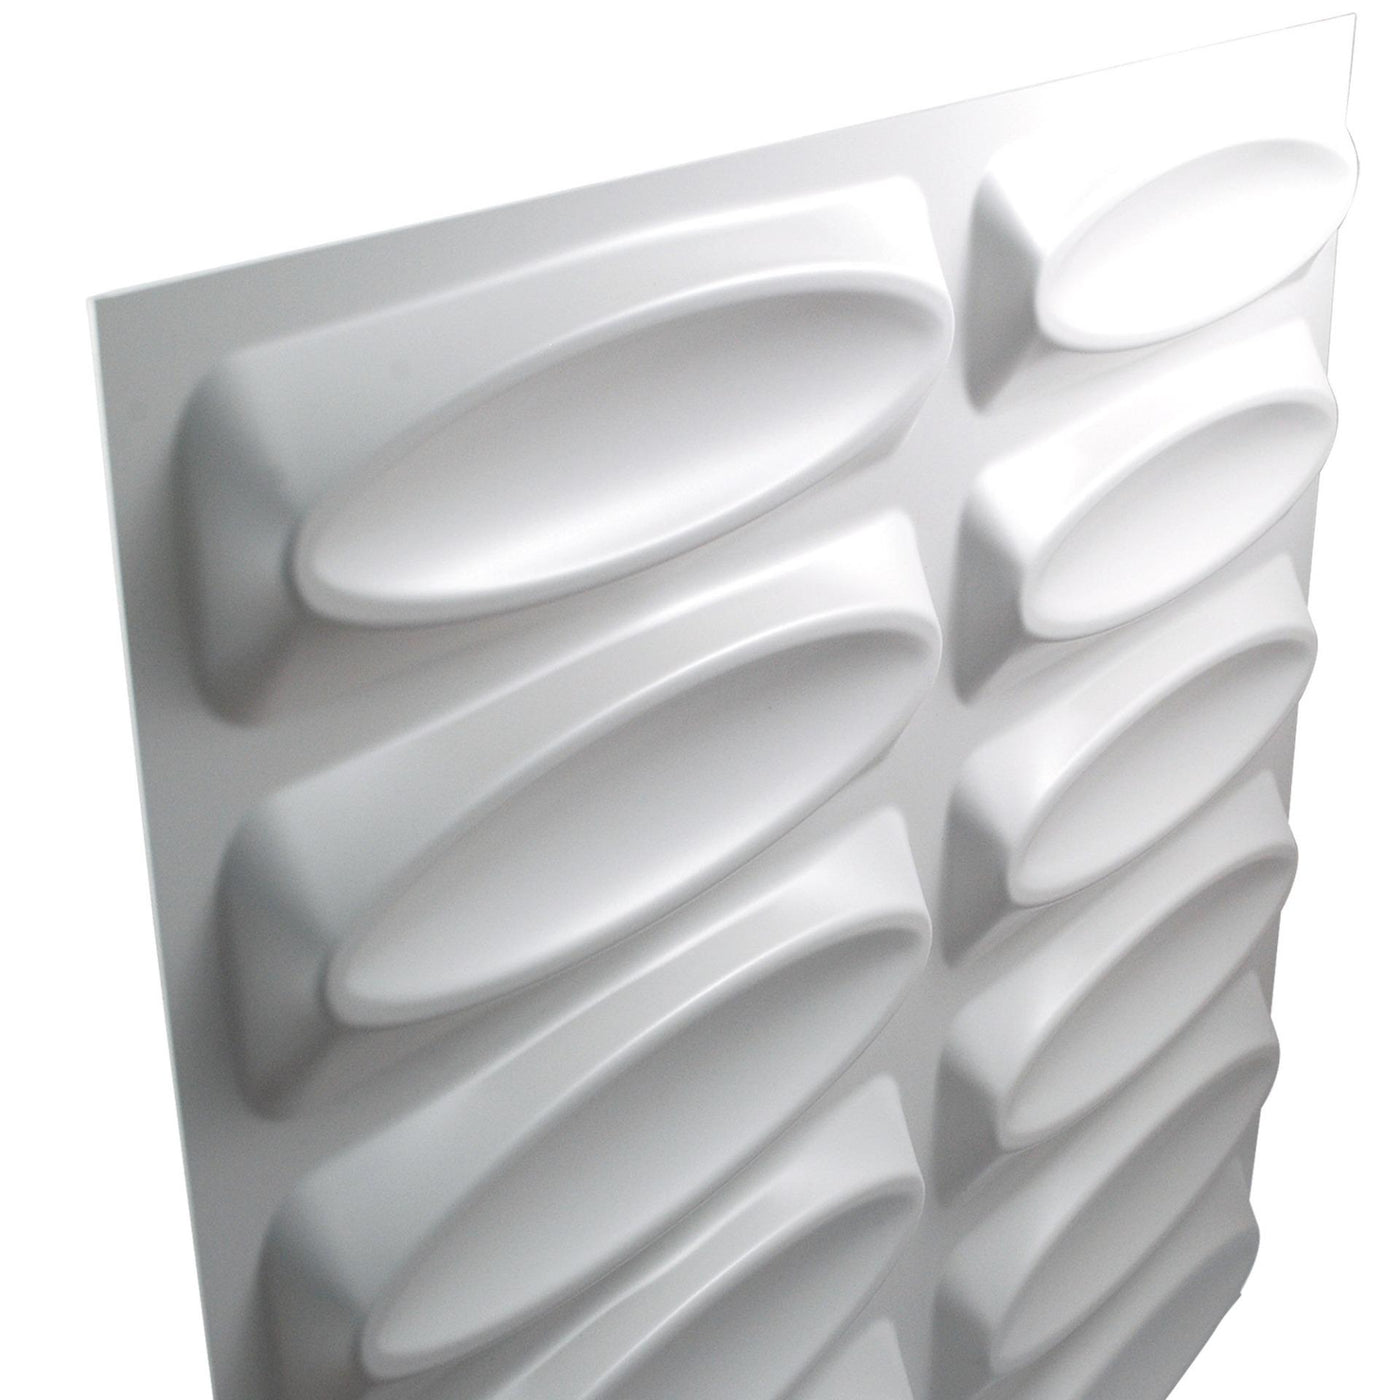 NEST DESIGN LAB 3D Wall-Art Sails 4pcs 500mmX 500mm X 1.0mm Amazing Gift Idea For Any Occasion!